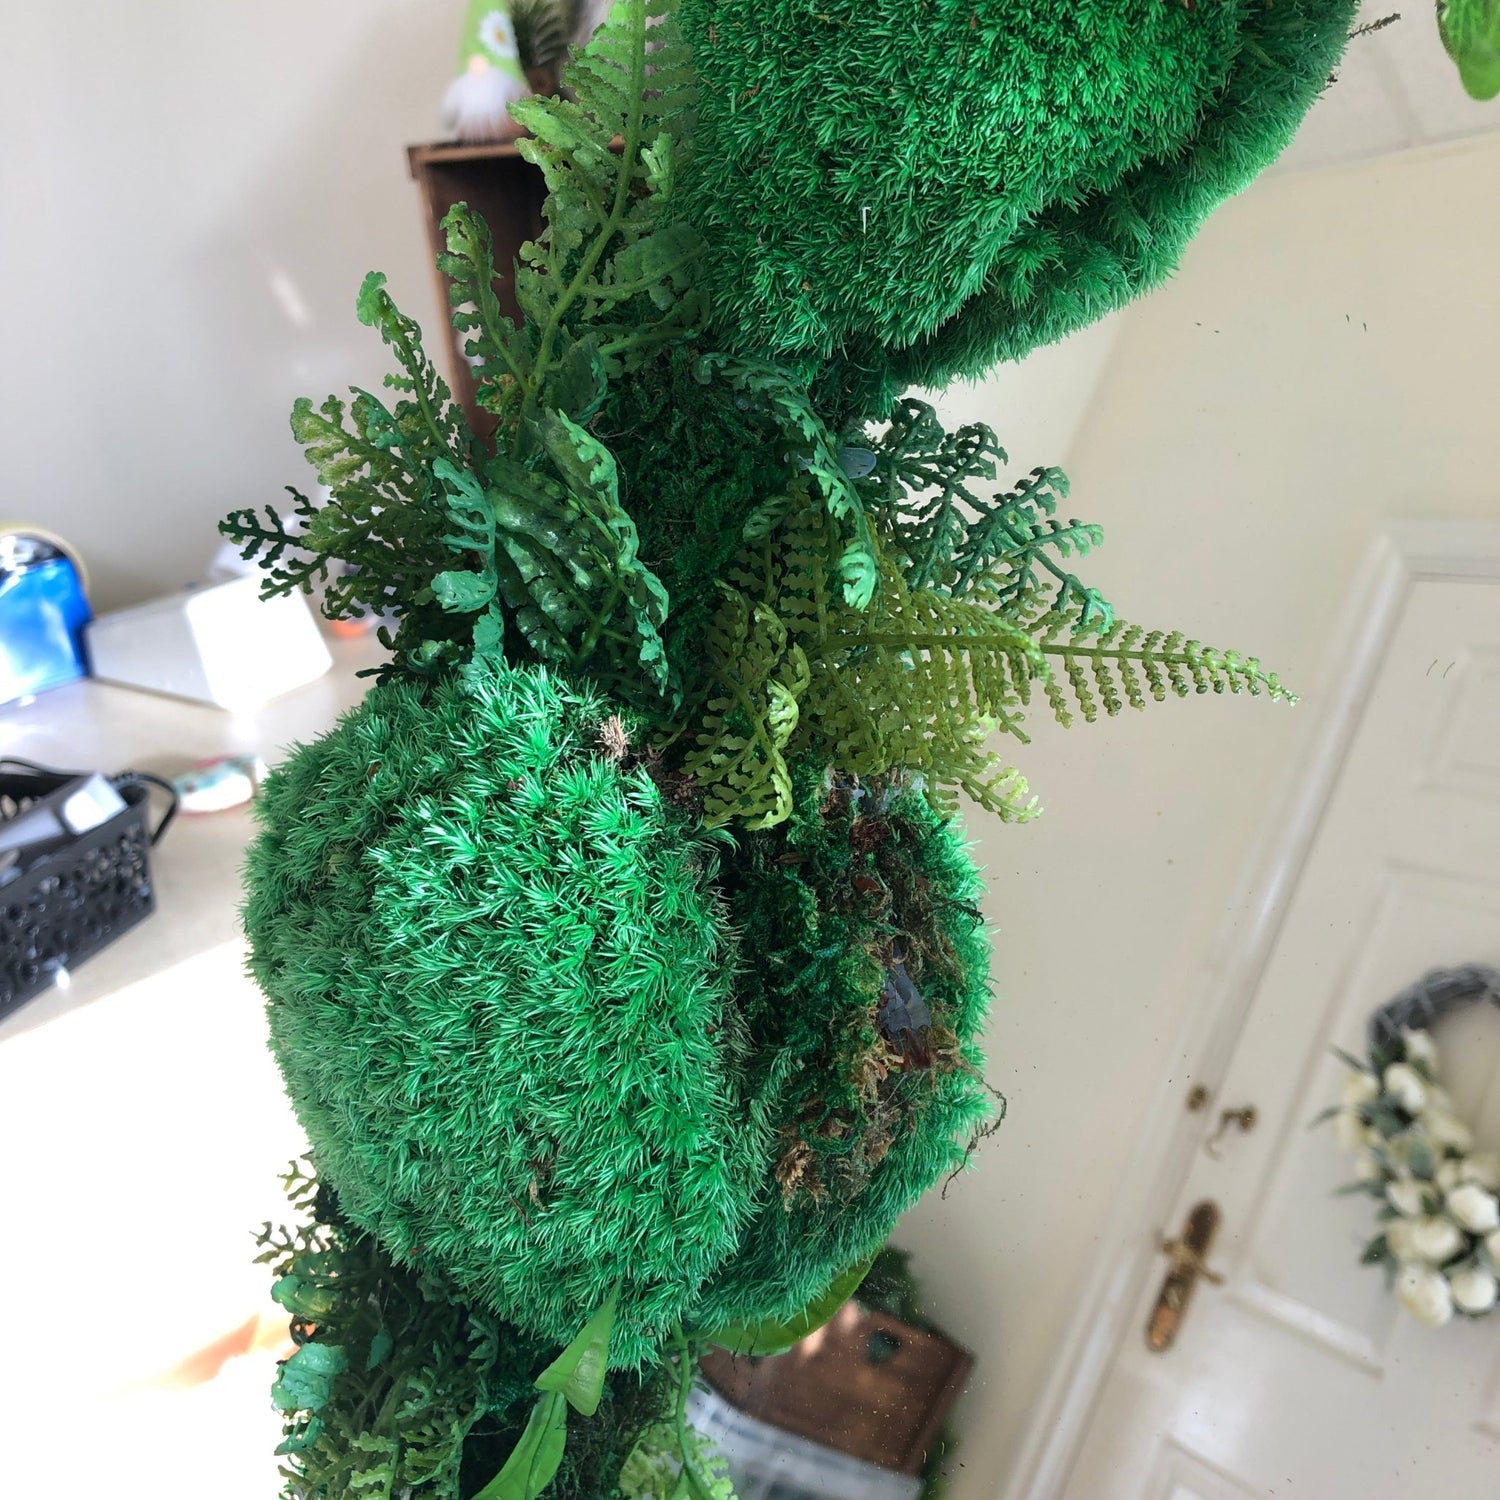 Fern and Moss Mirror - floralwishes